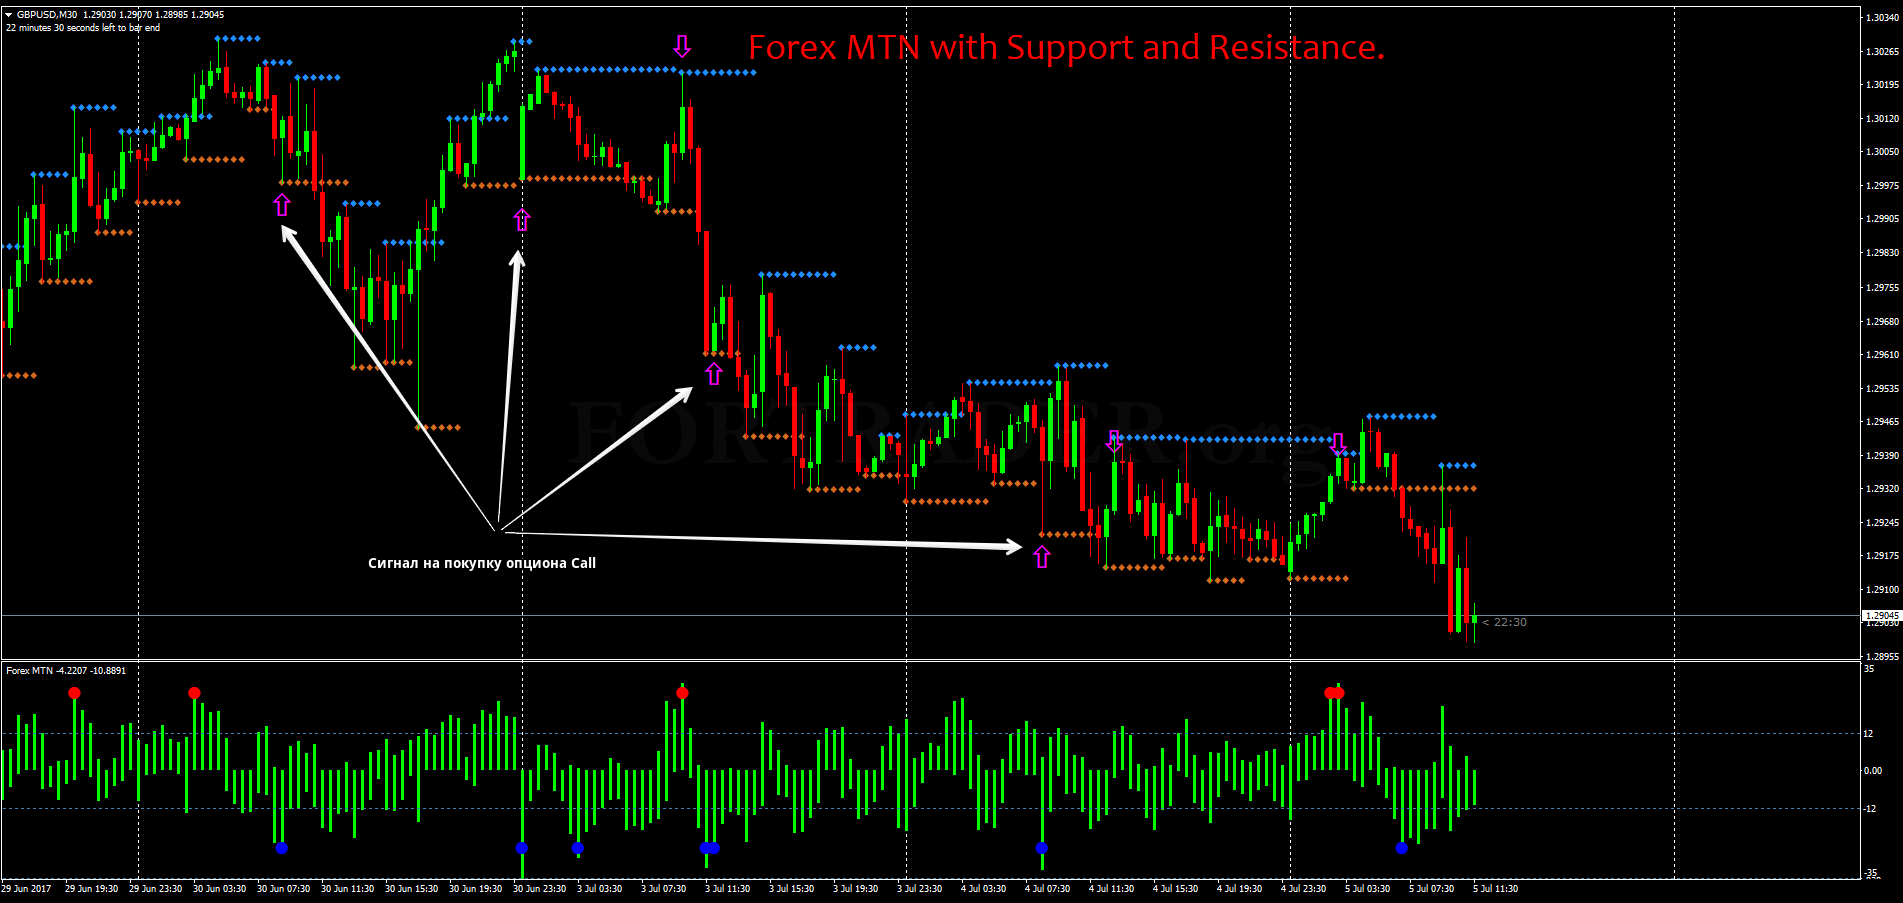 Steve primo support and resistance forex austin a35 indicator forex